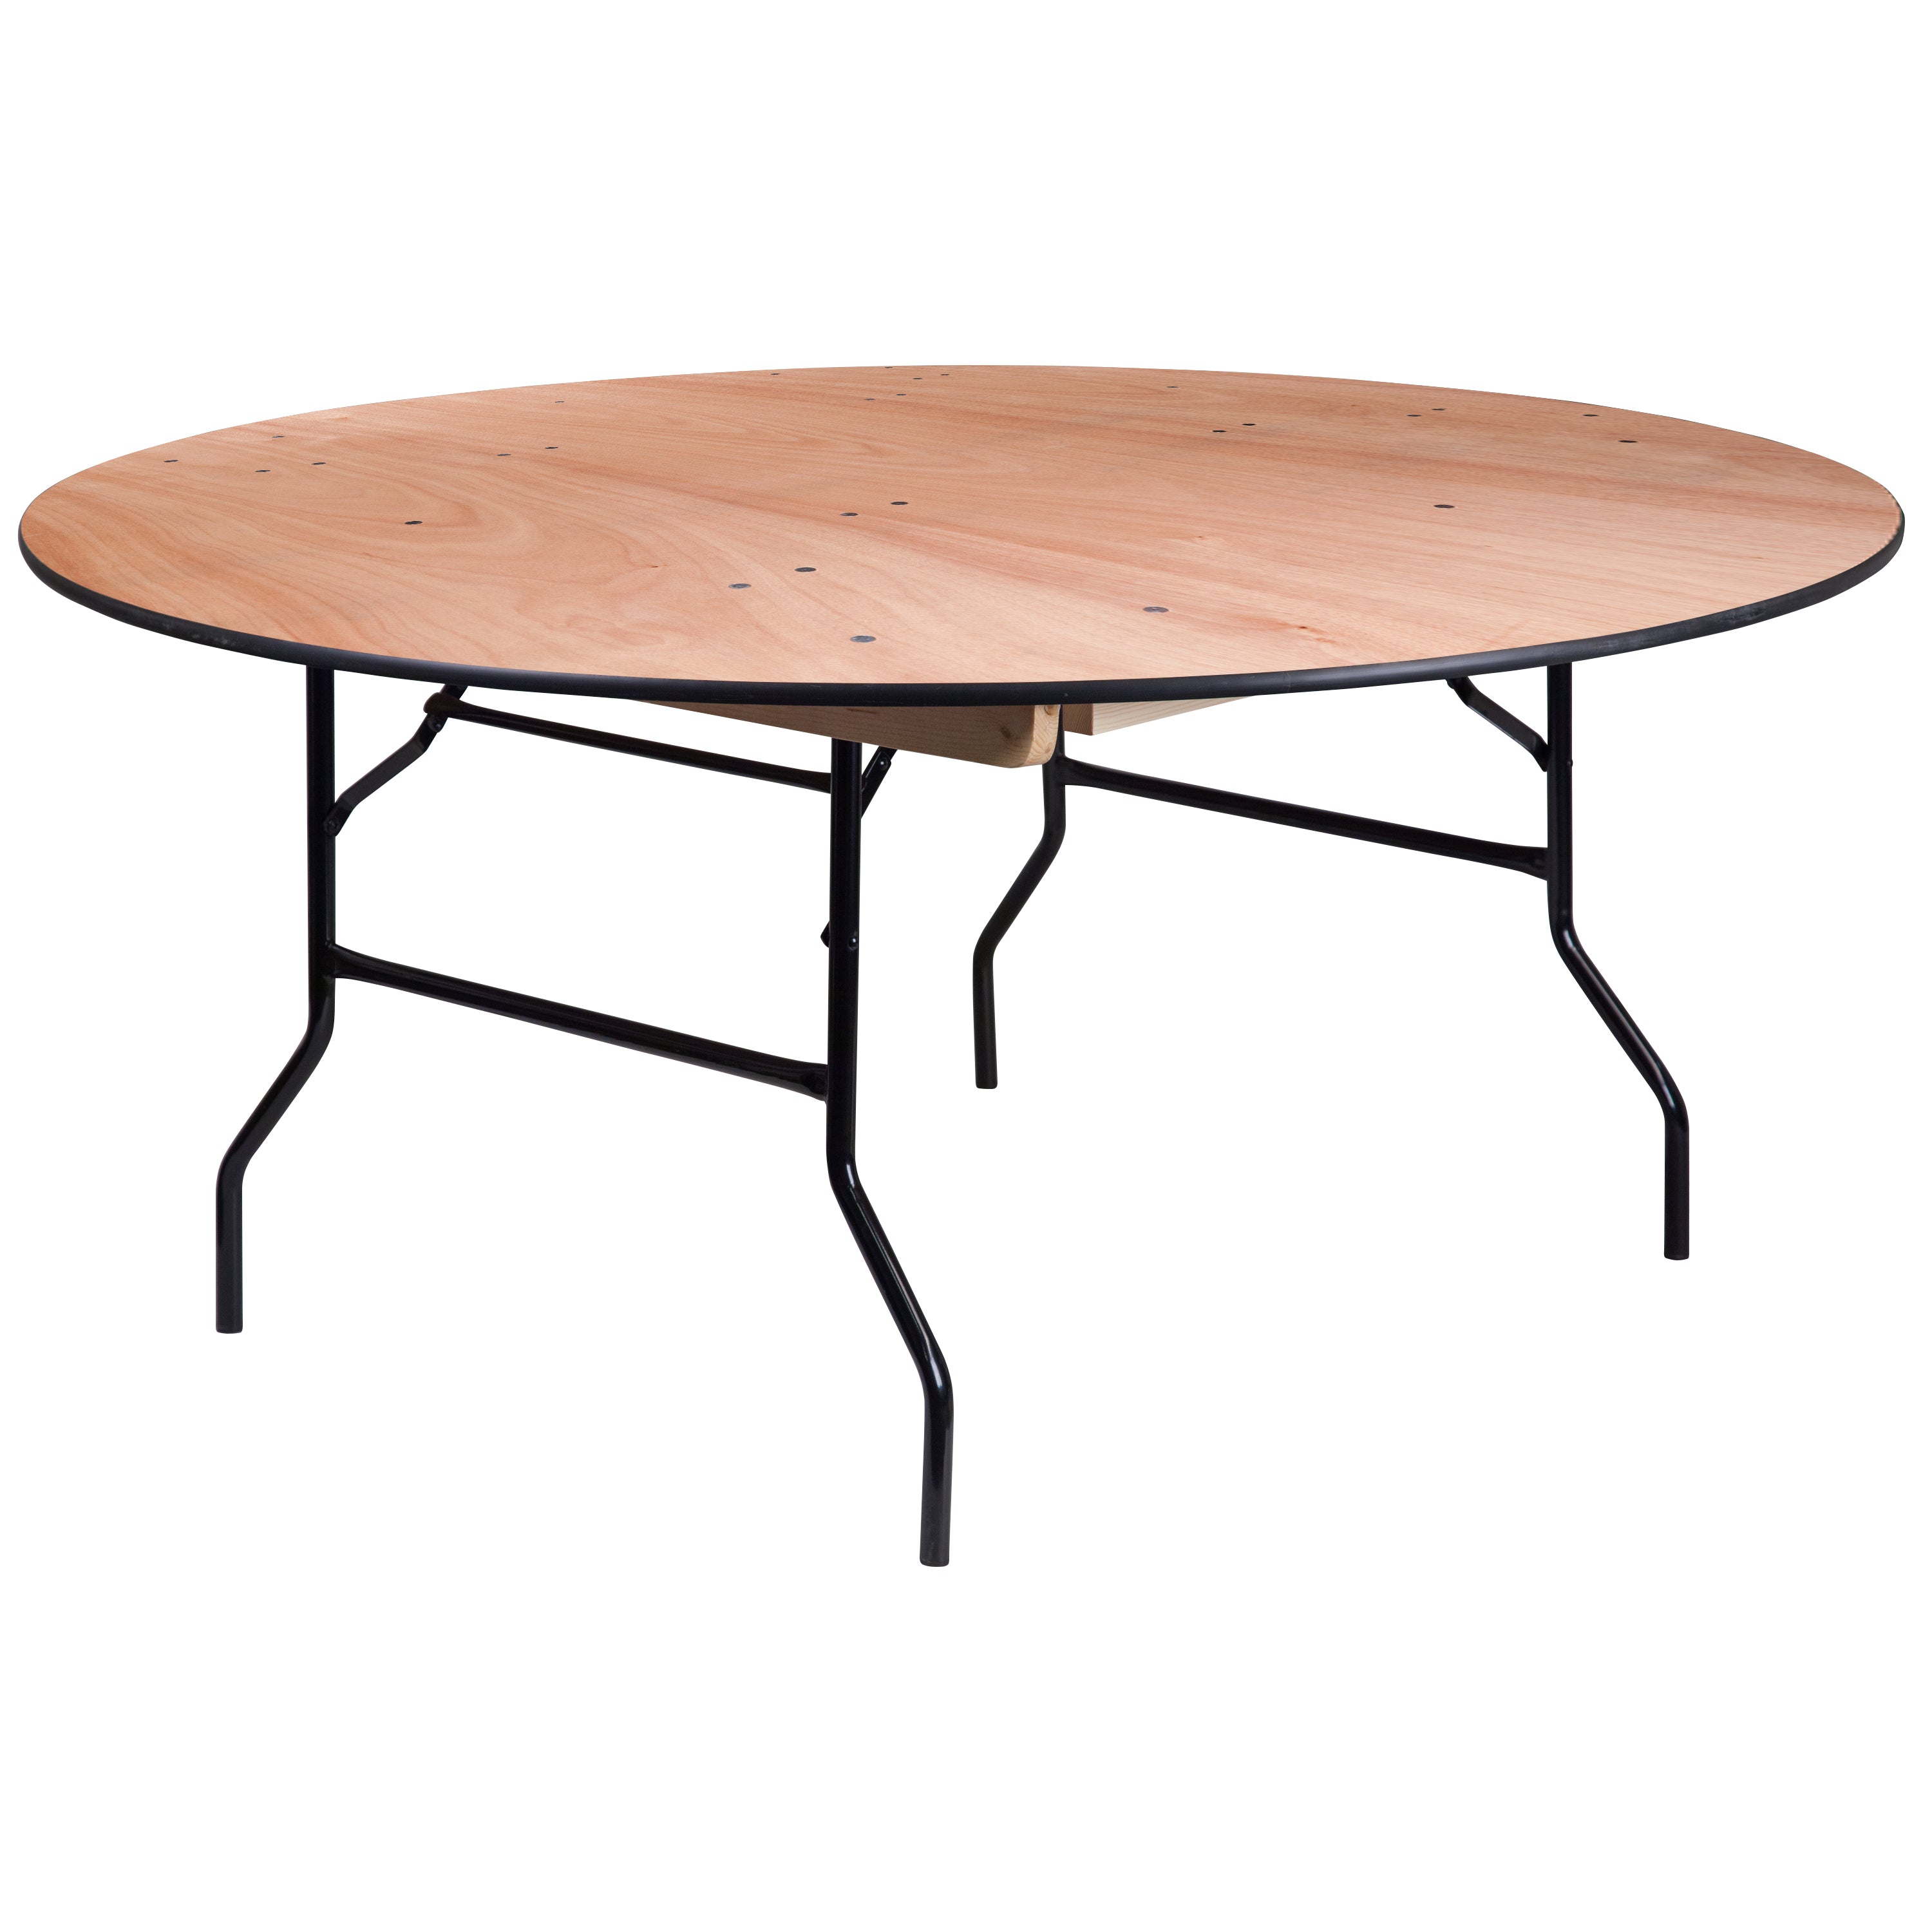 5.5-Foot Round Wood Folding Banquet Table with Clear Coated Finished Top-Round Folding Table-Flash Furniture-Wall2Wall Furnishings